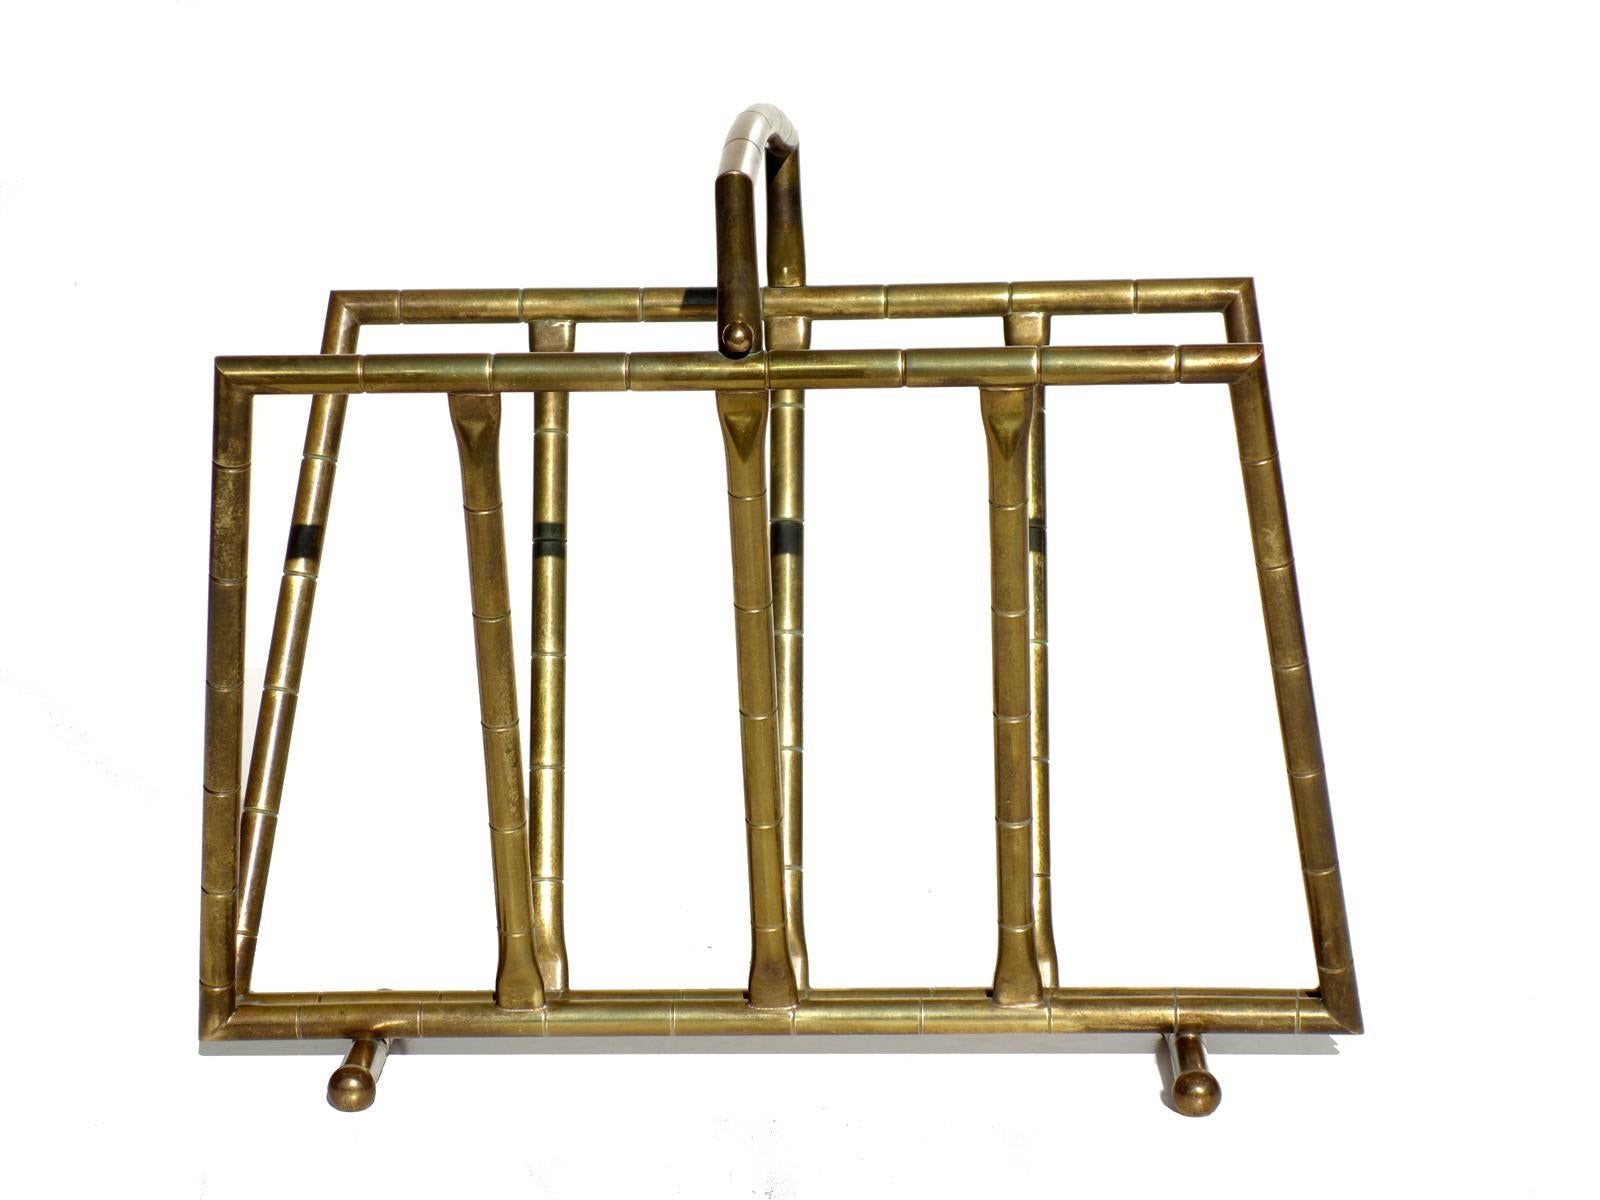 Bamboo brass magazine rack

Excellent condition.